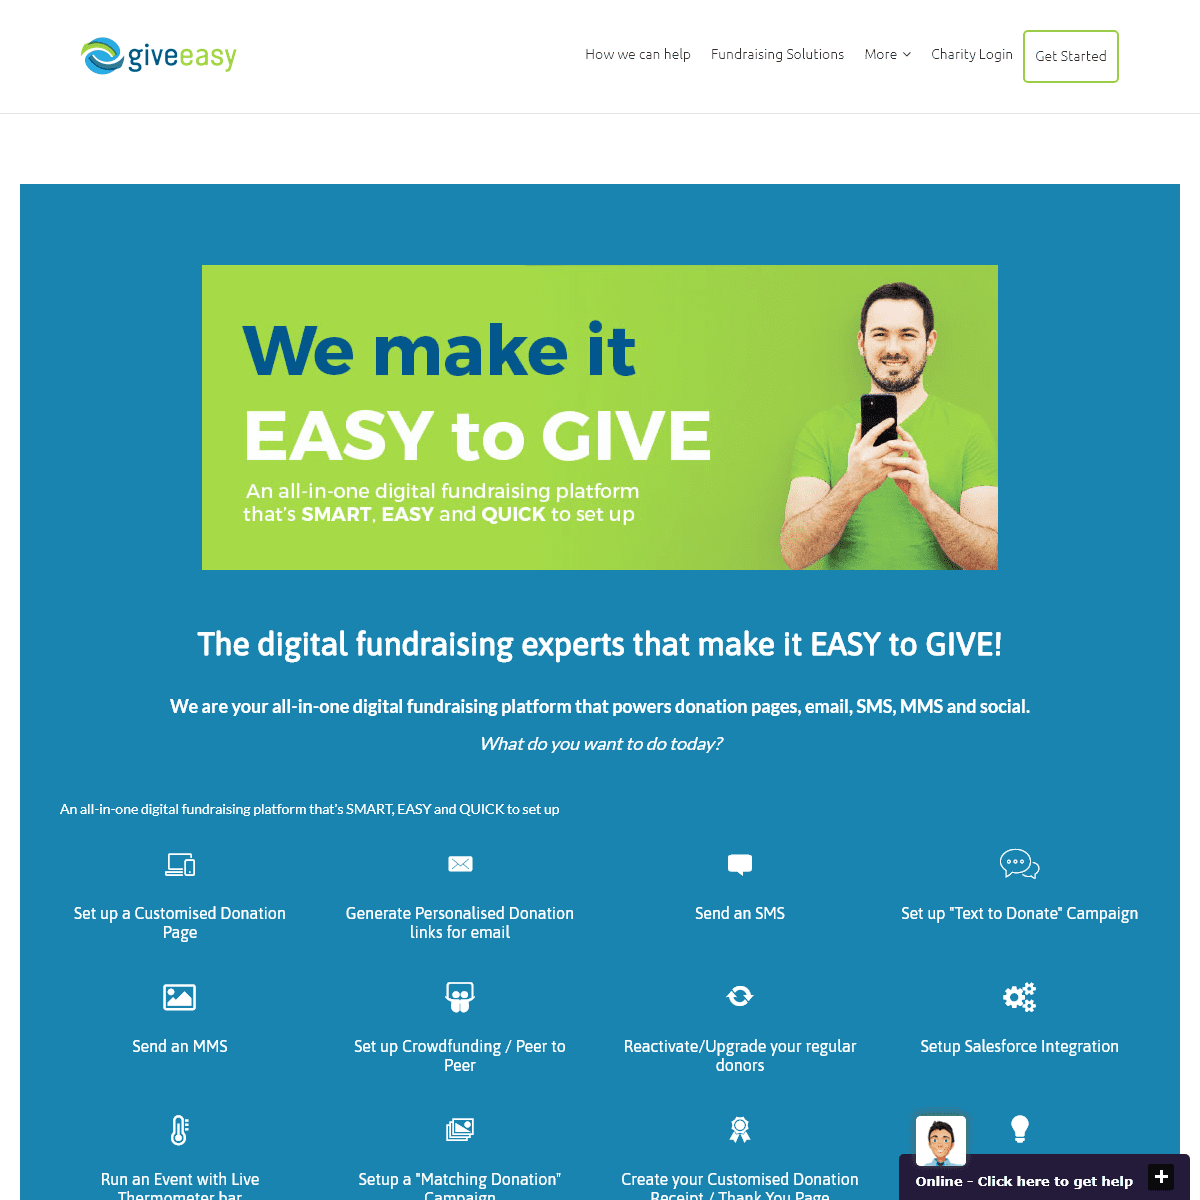 A complete backup of giveeasy.org